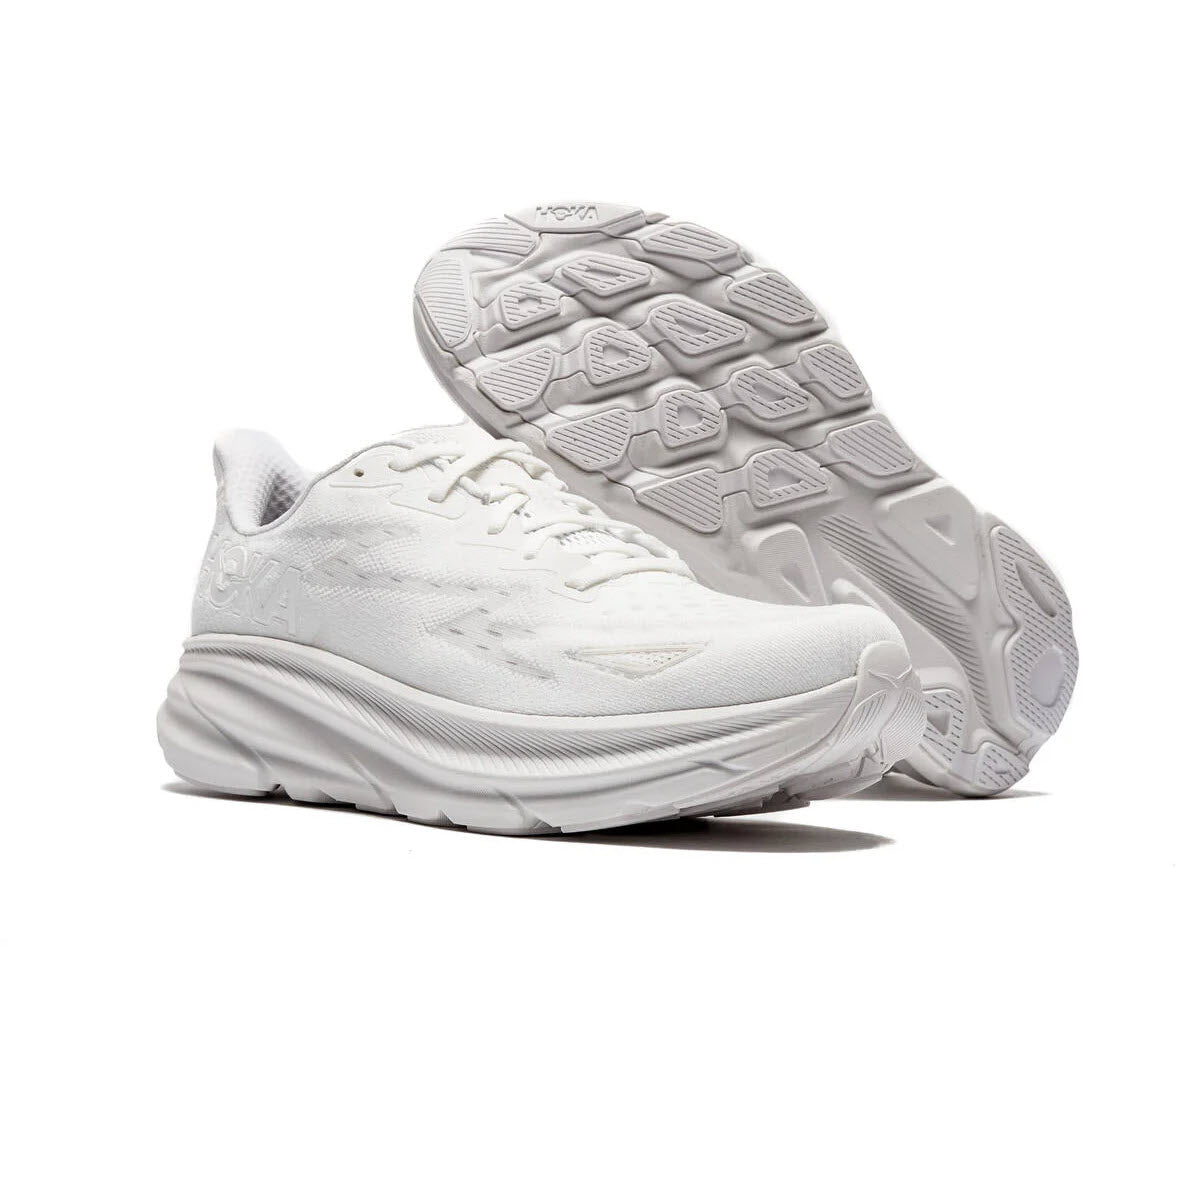 A pair of white Hoka CLIFTON 9 running shoes displayed with one shoe flipped to show the improved outsole design.